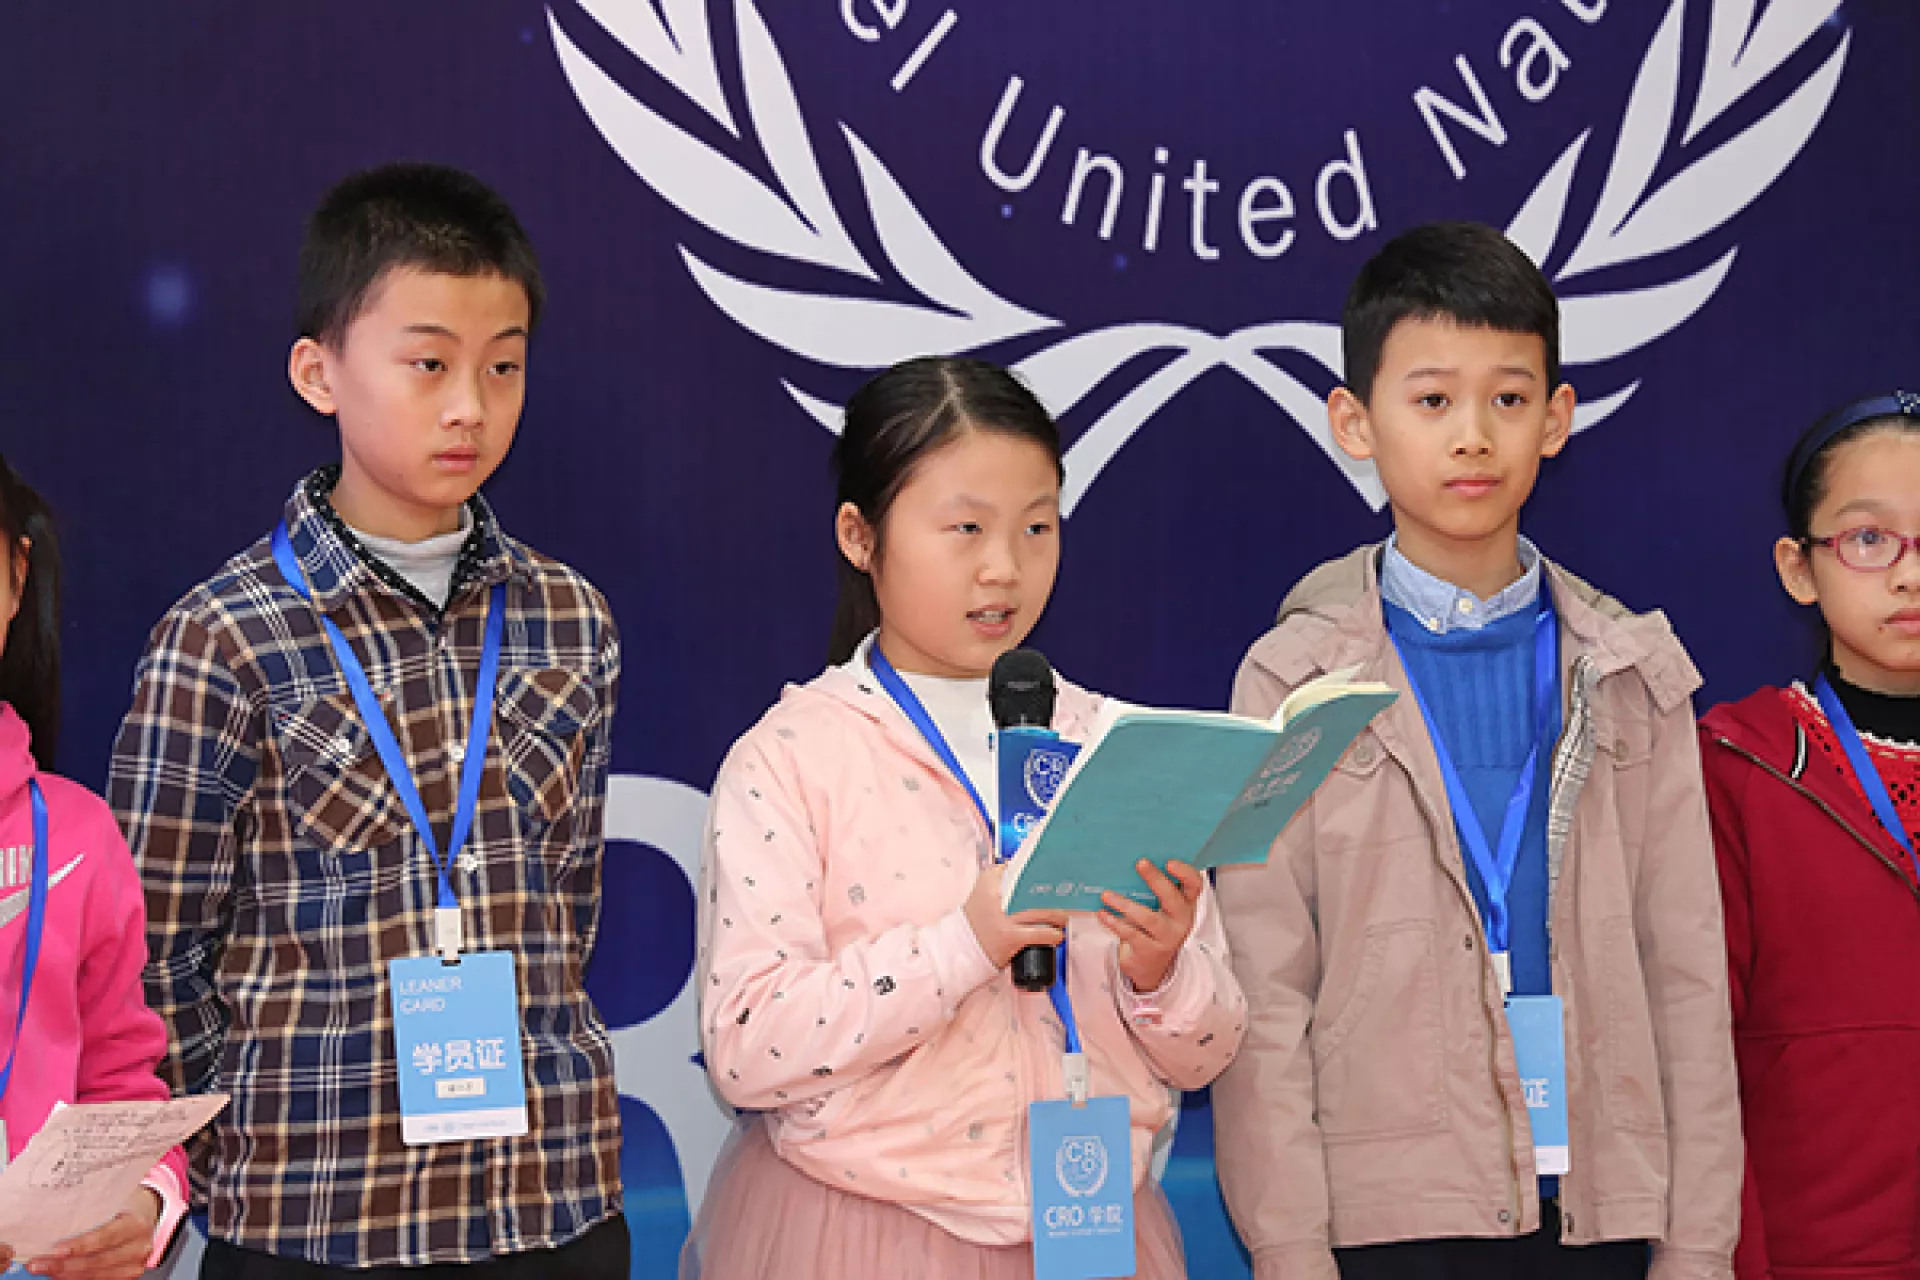 Child research officers present the results of their research at a Children's Internet Conference in Guangzhou, China.